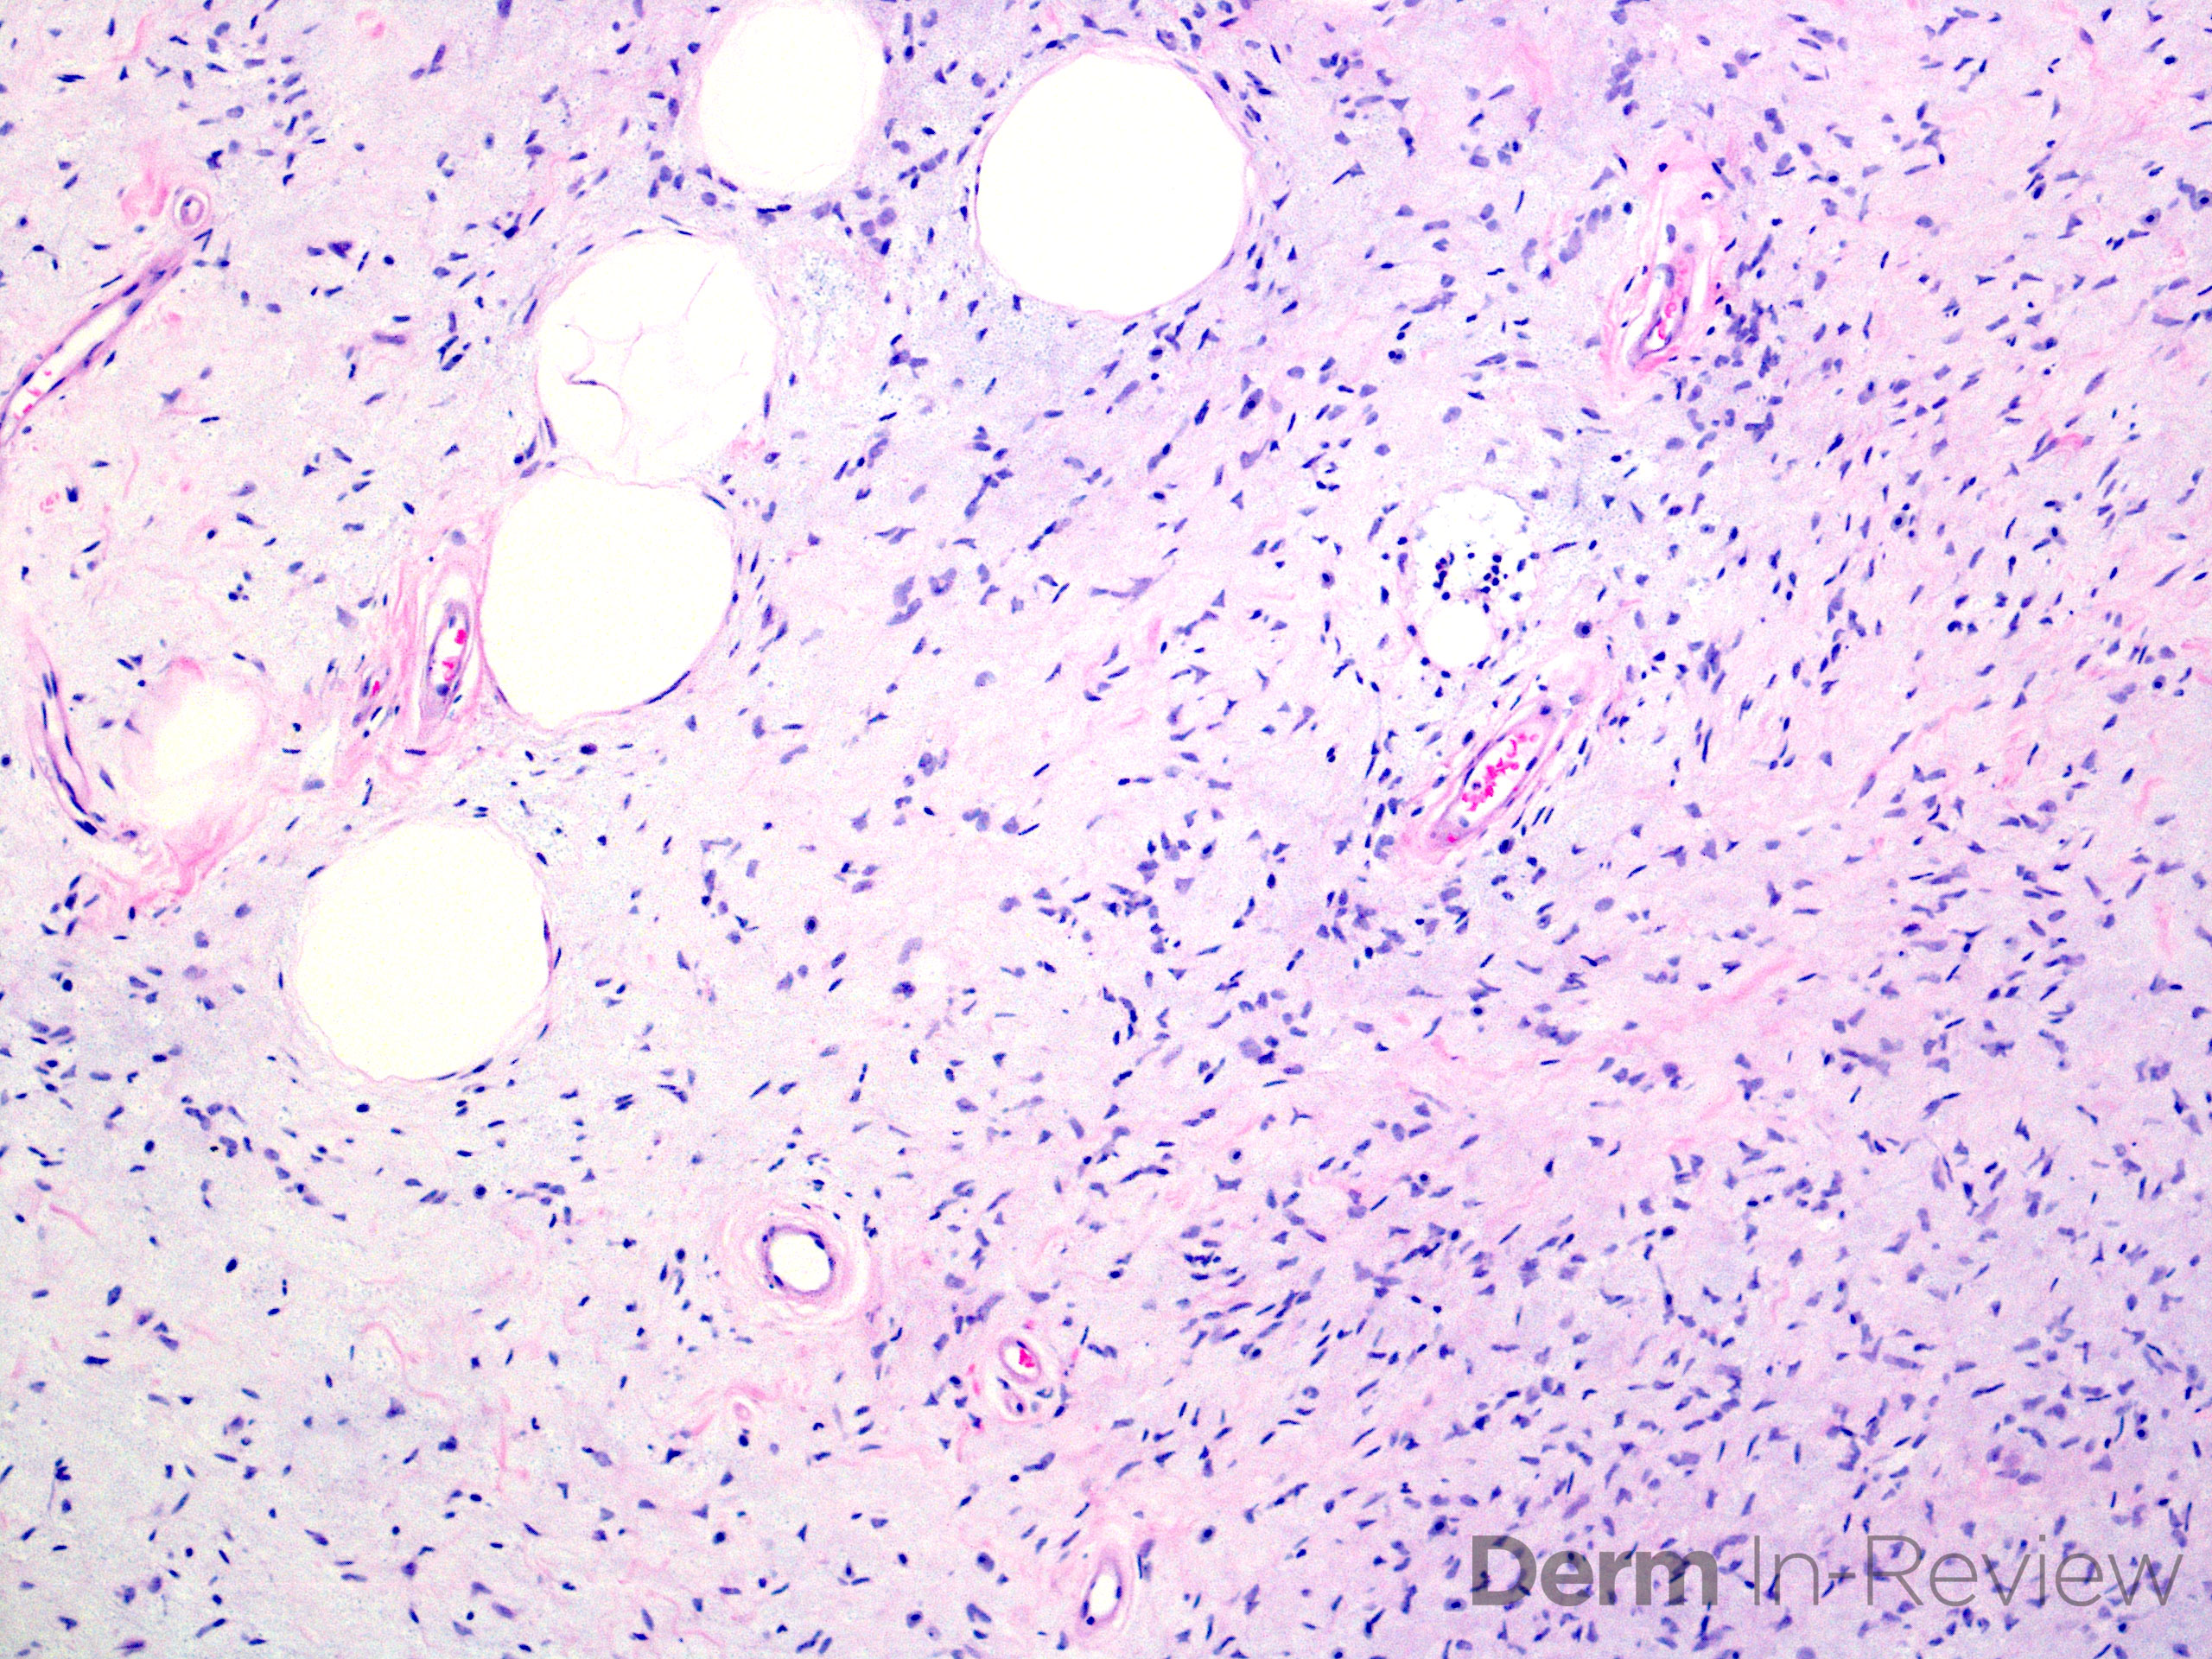 B-Spindle-cell-lipoma-copy